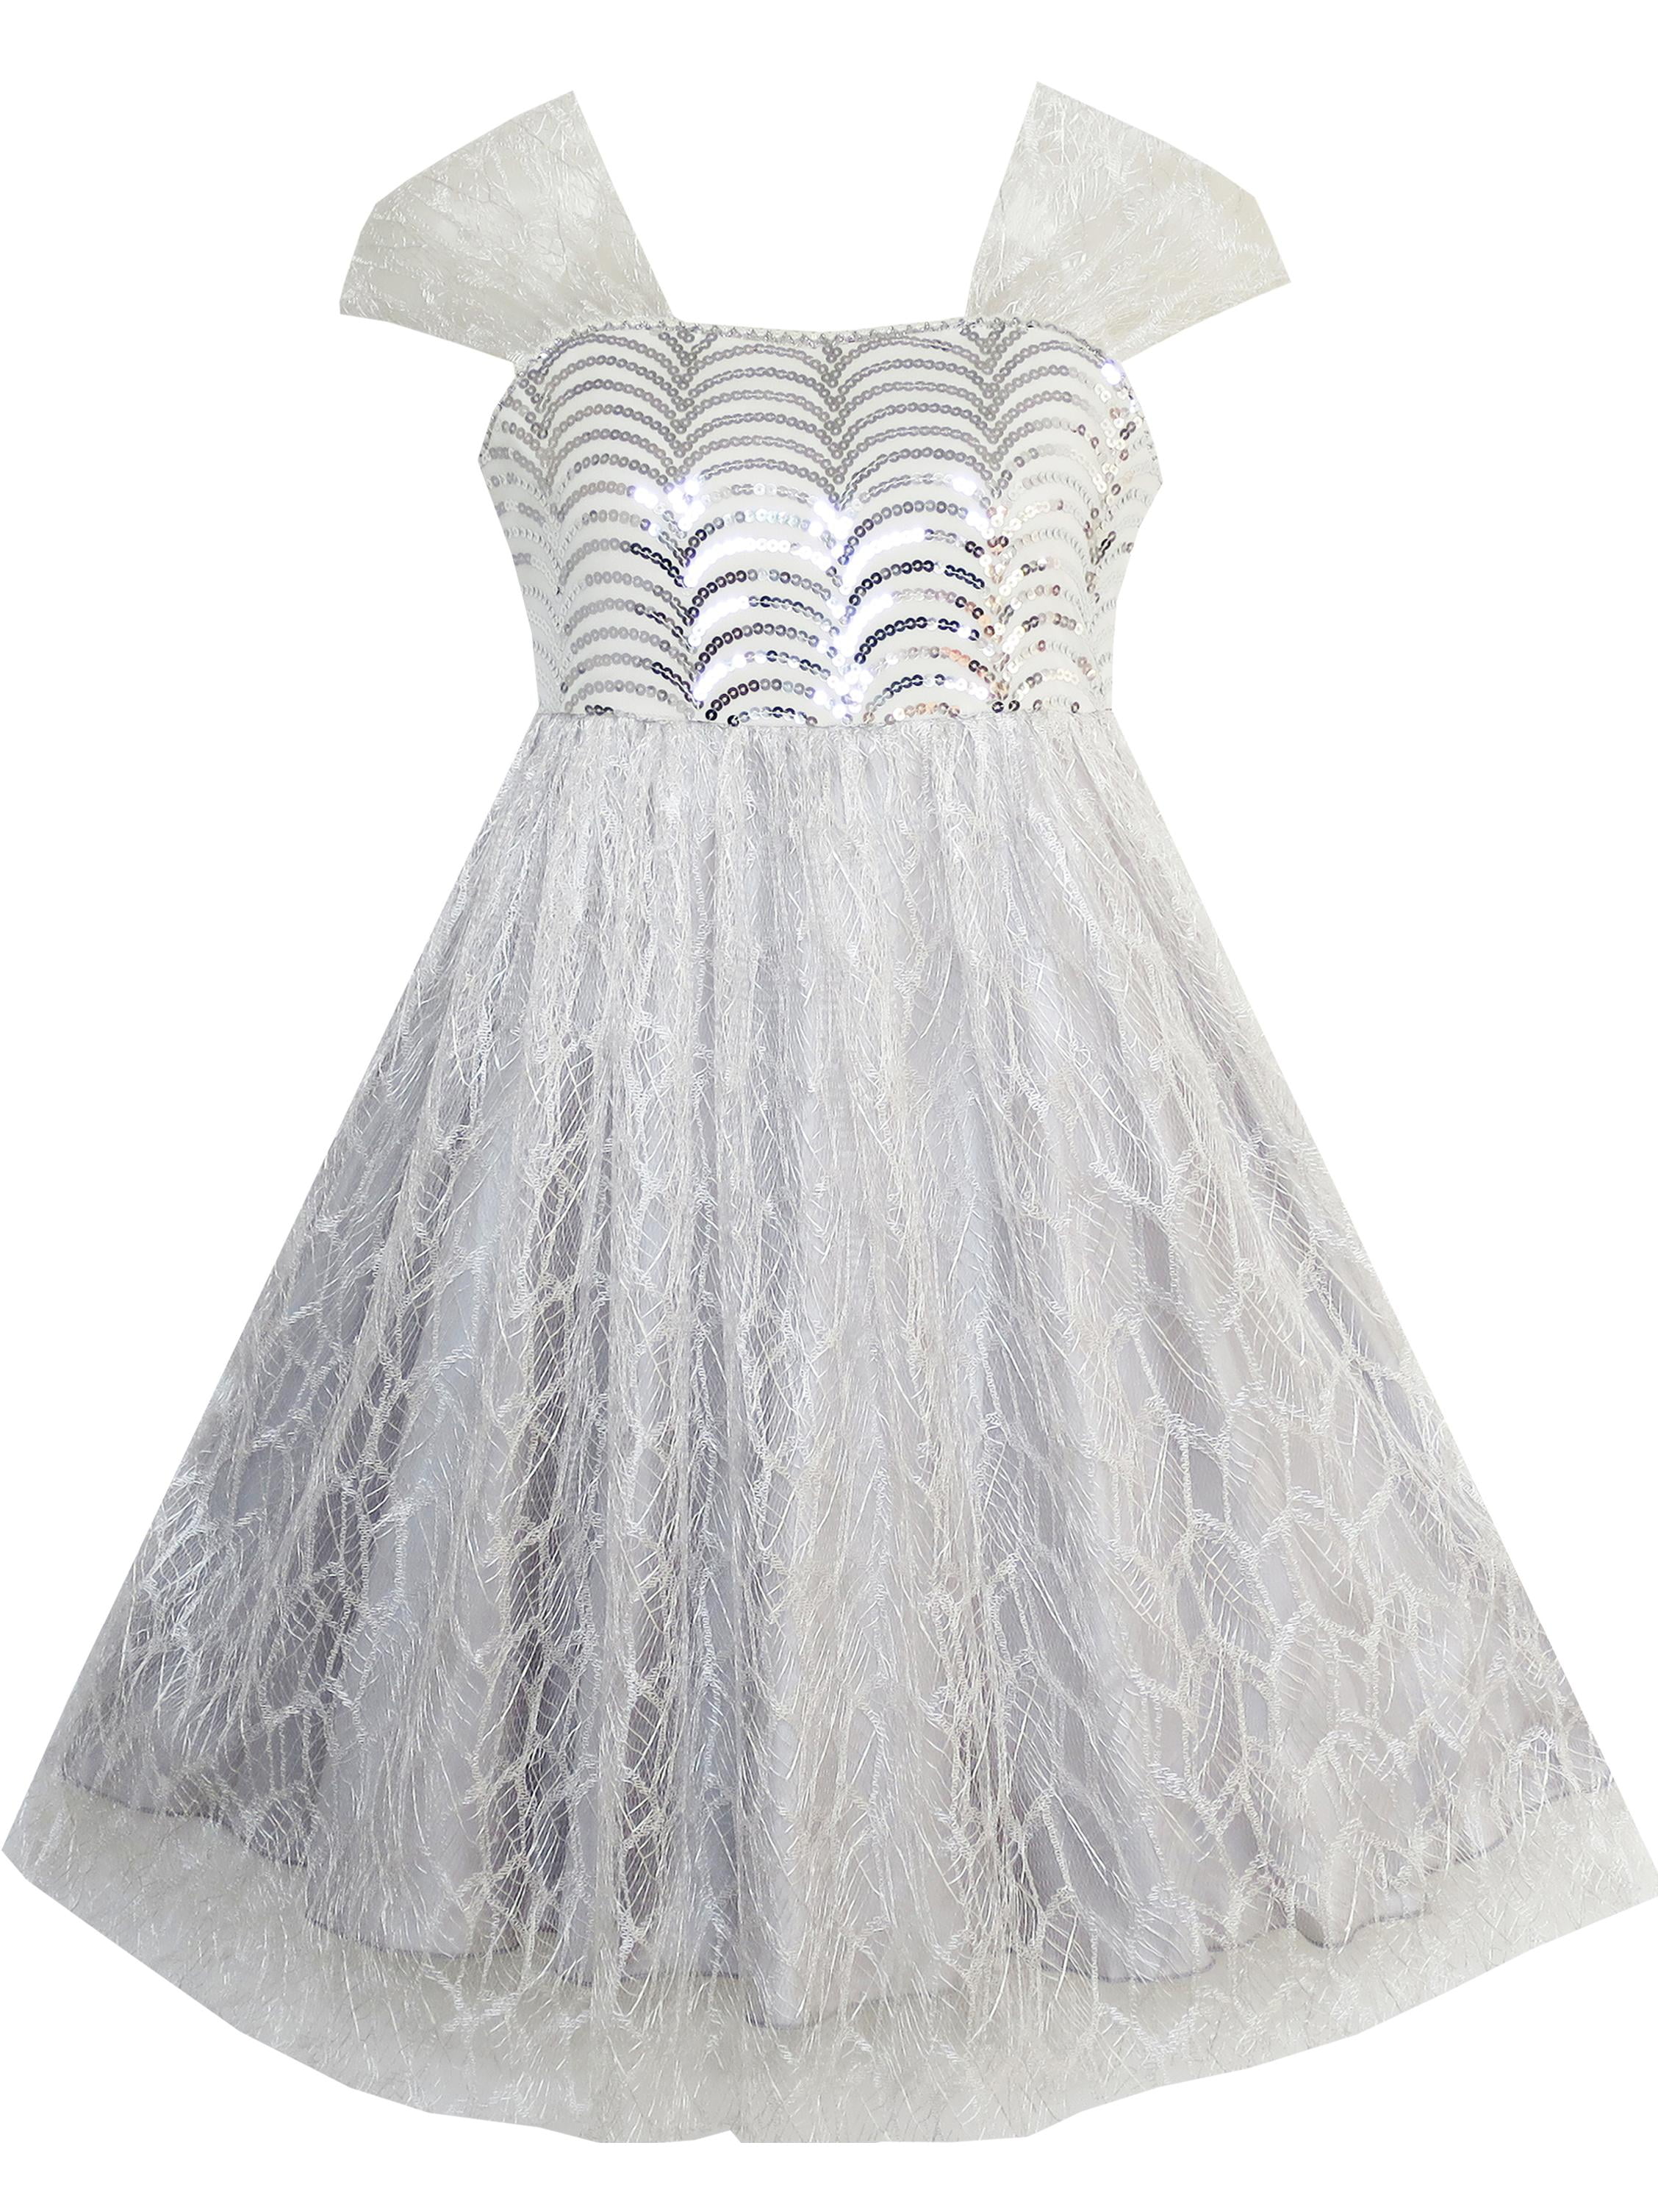 Girls Dress Sequin Mesh Party Wedding Tulle Silver Gray 12 Years ...